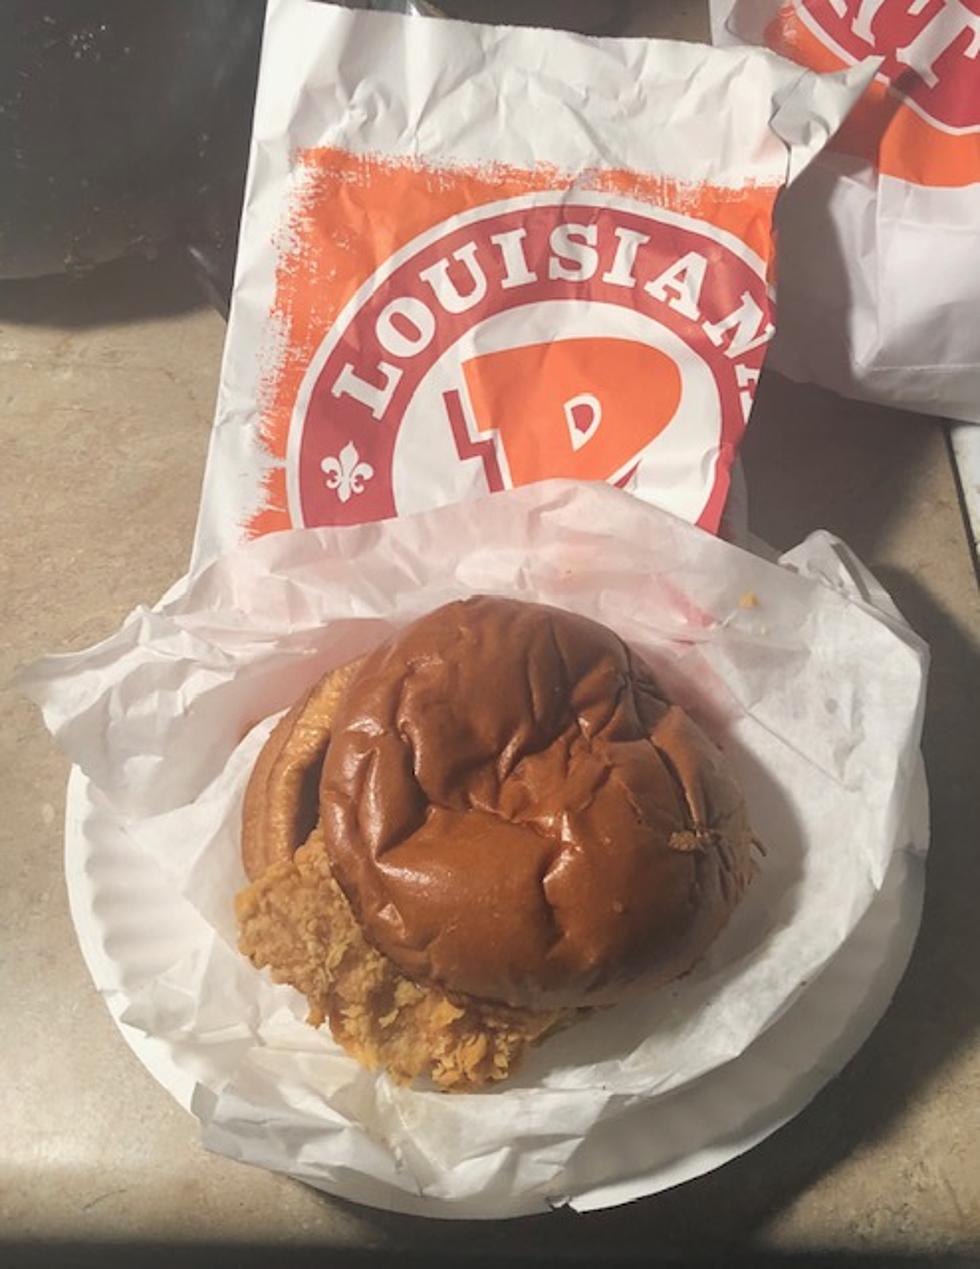 My Review Of Popeye’s Chicken Sandwich….The Results May Surprise You